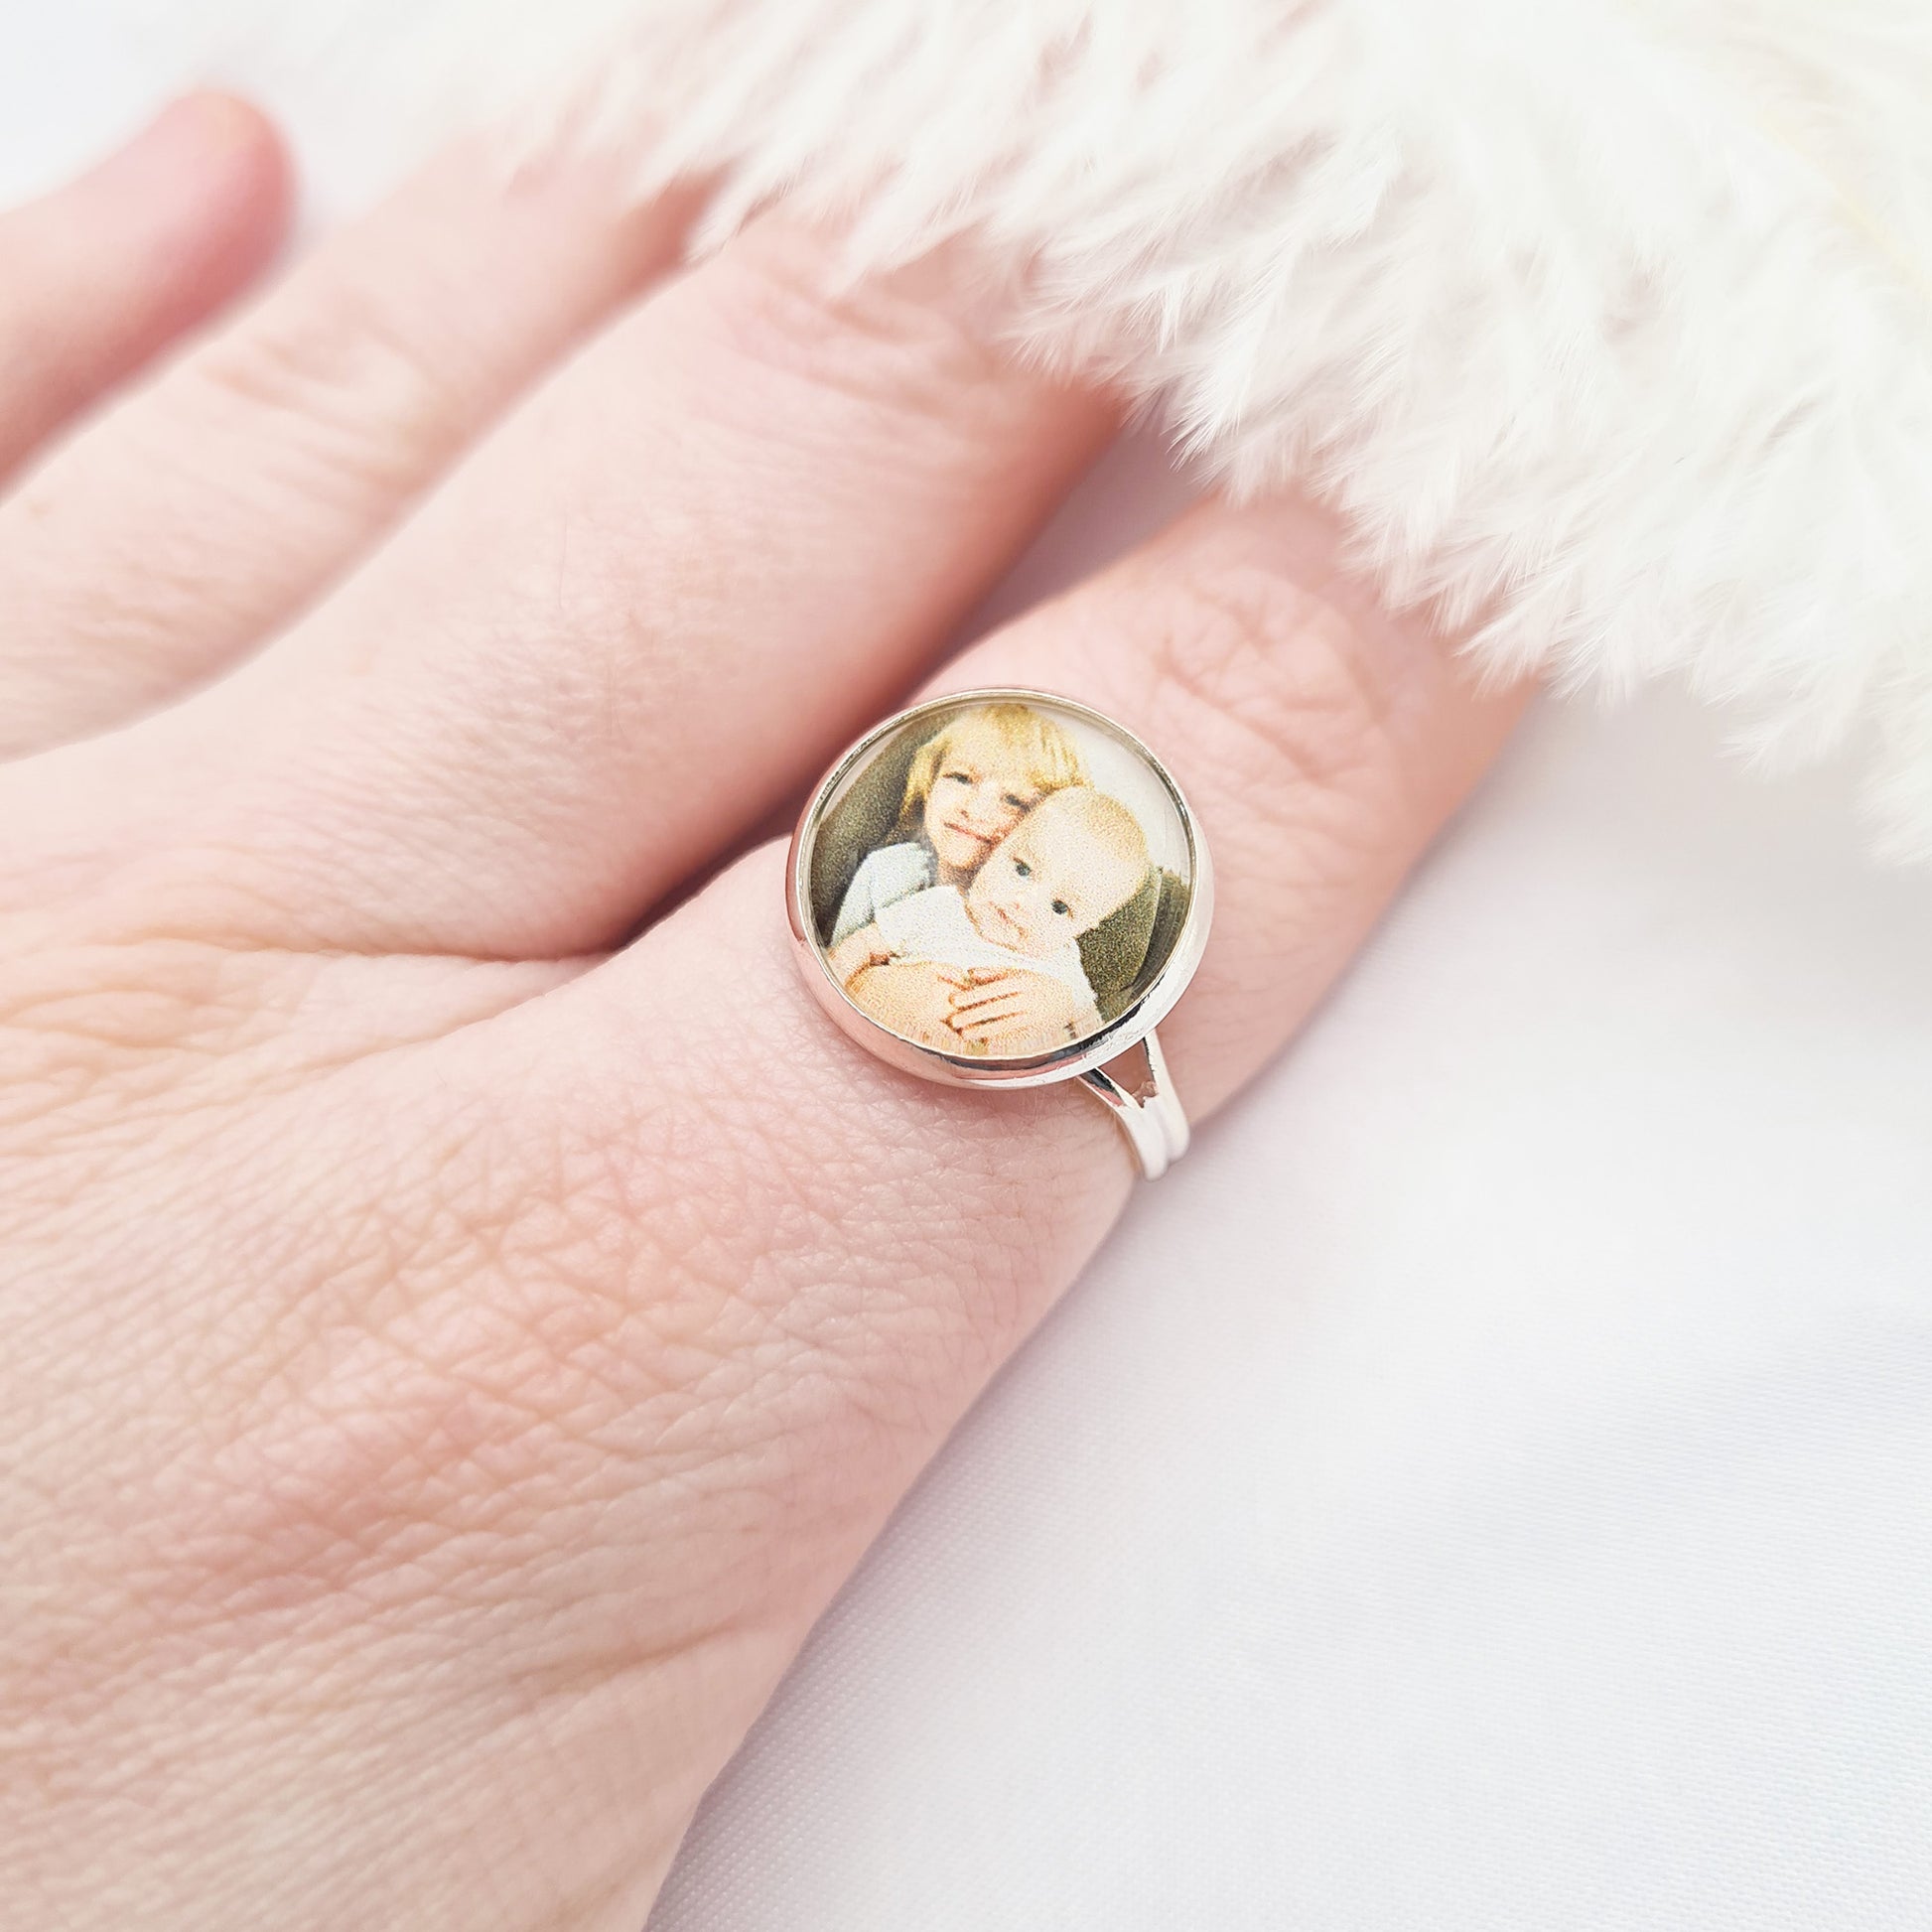 Silver ring personalised with a photo set in glass on a finger